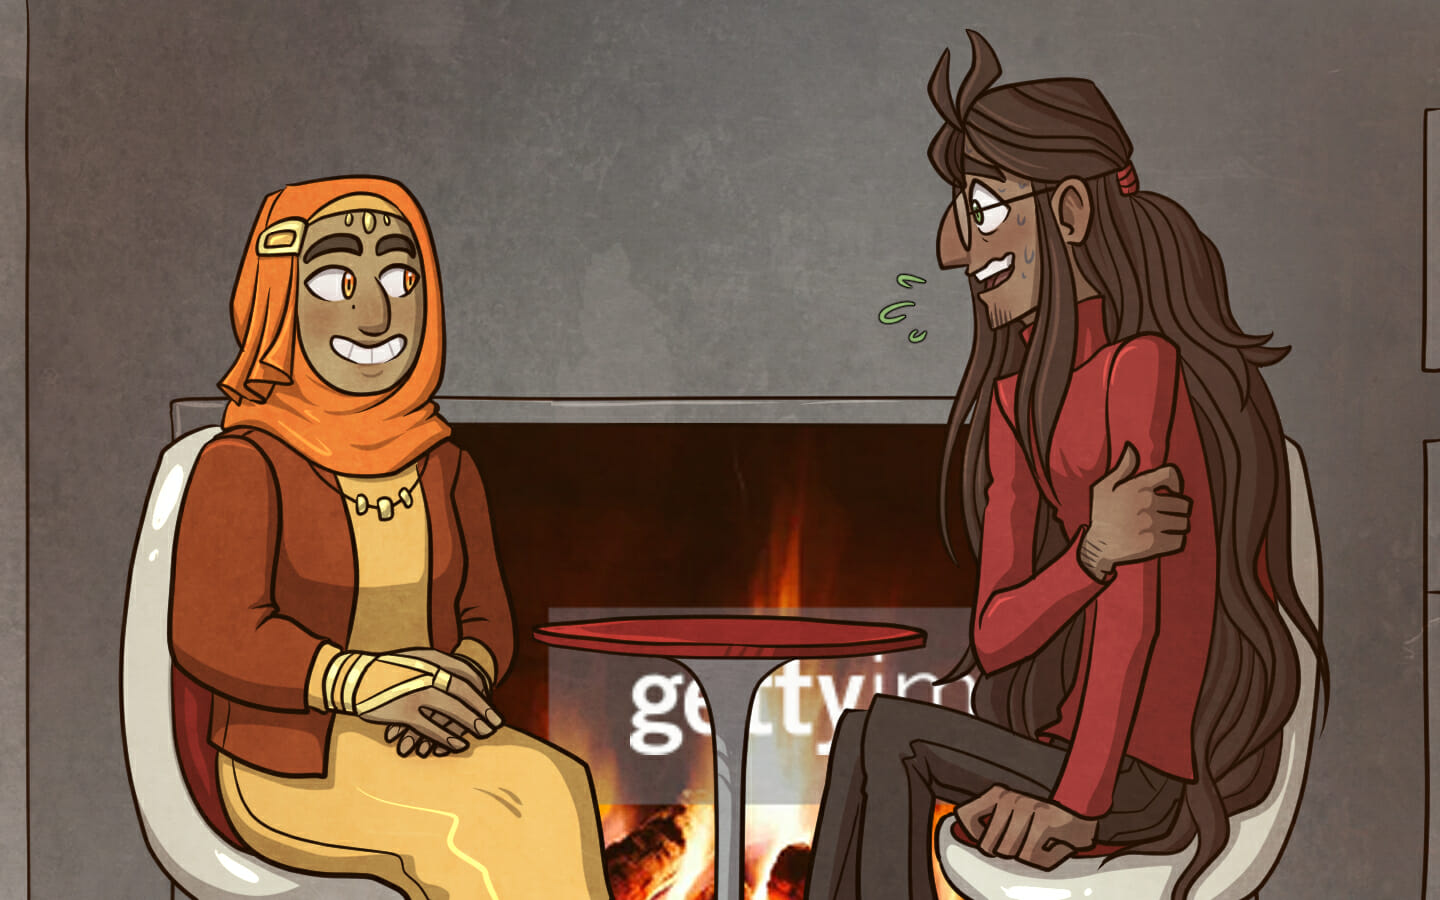 Tim tries to keep a conversation going with Yusra, but he's scared out of his wits.